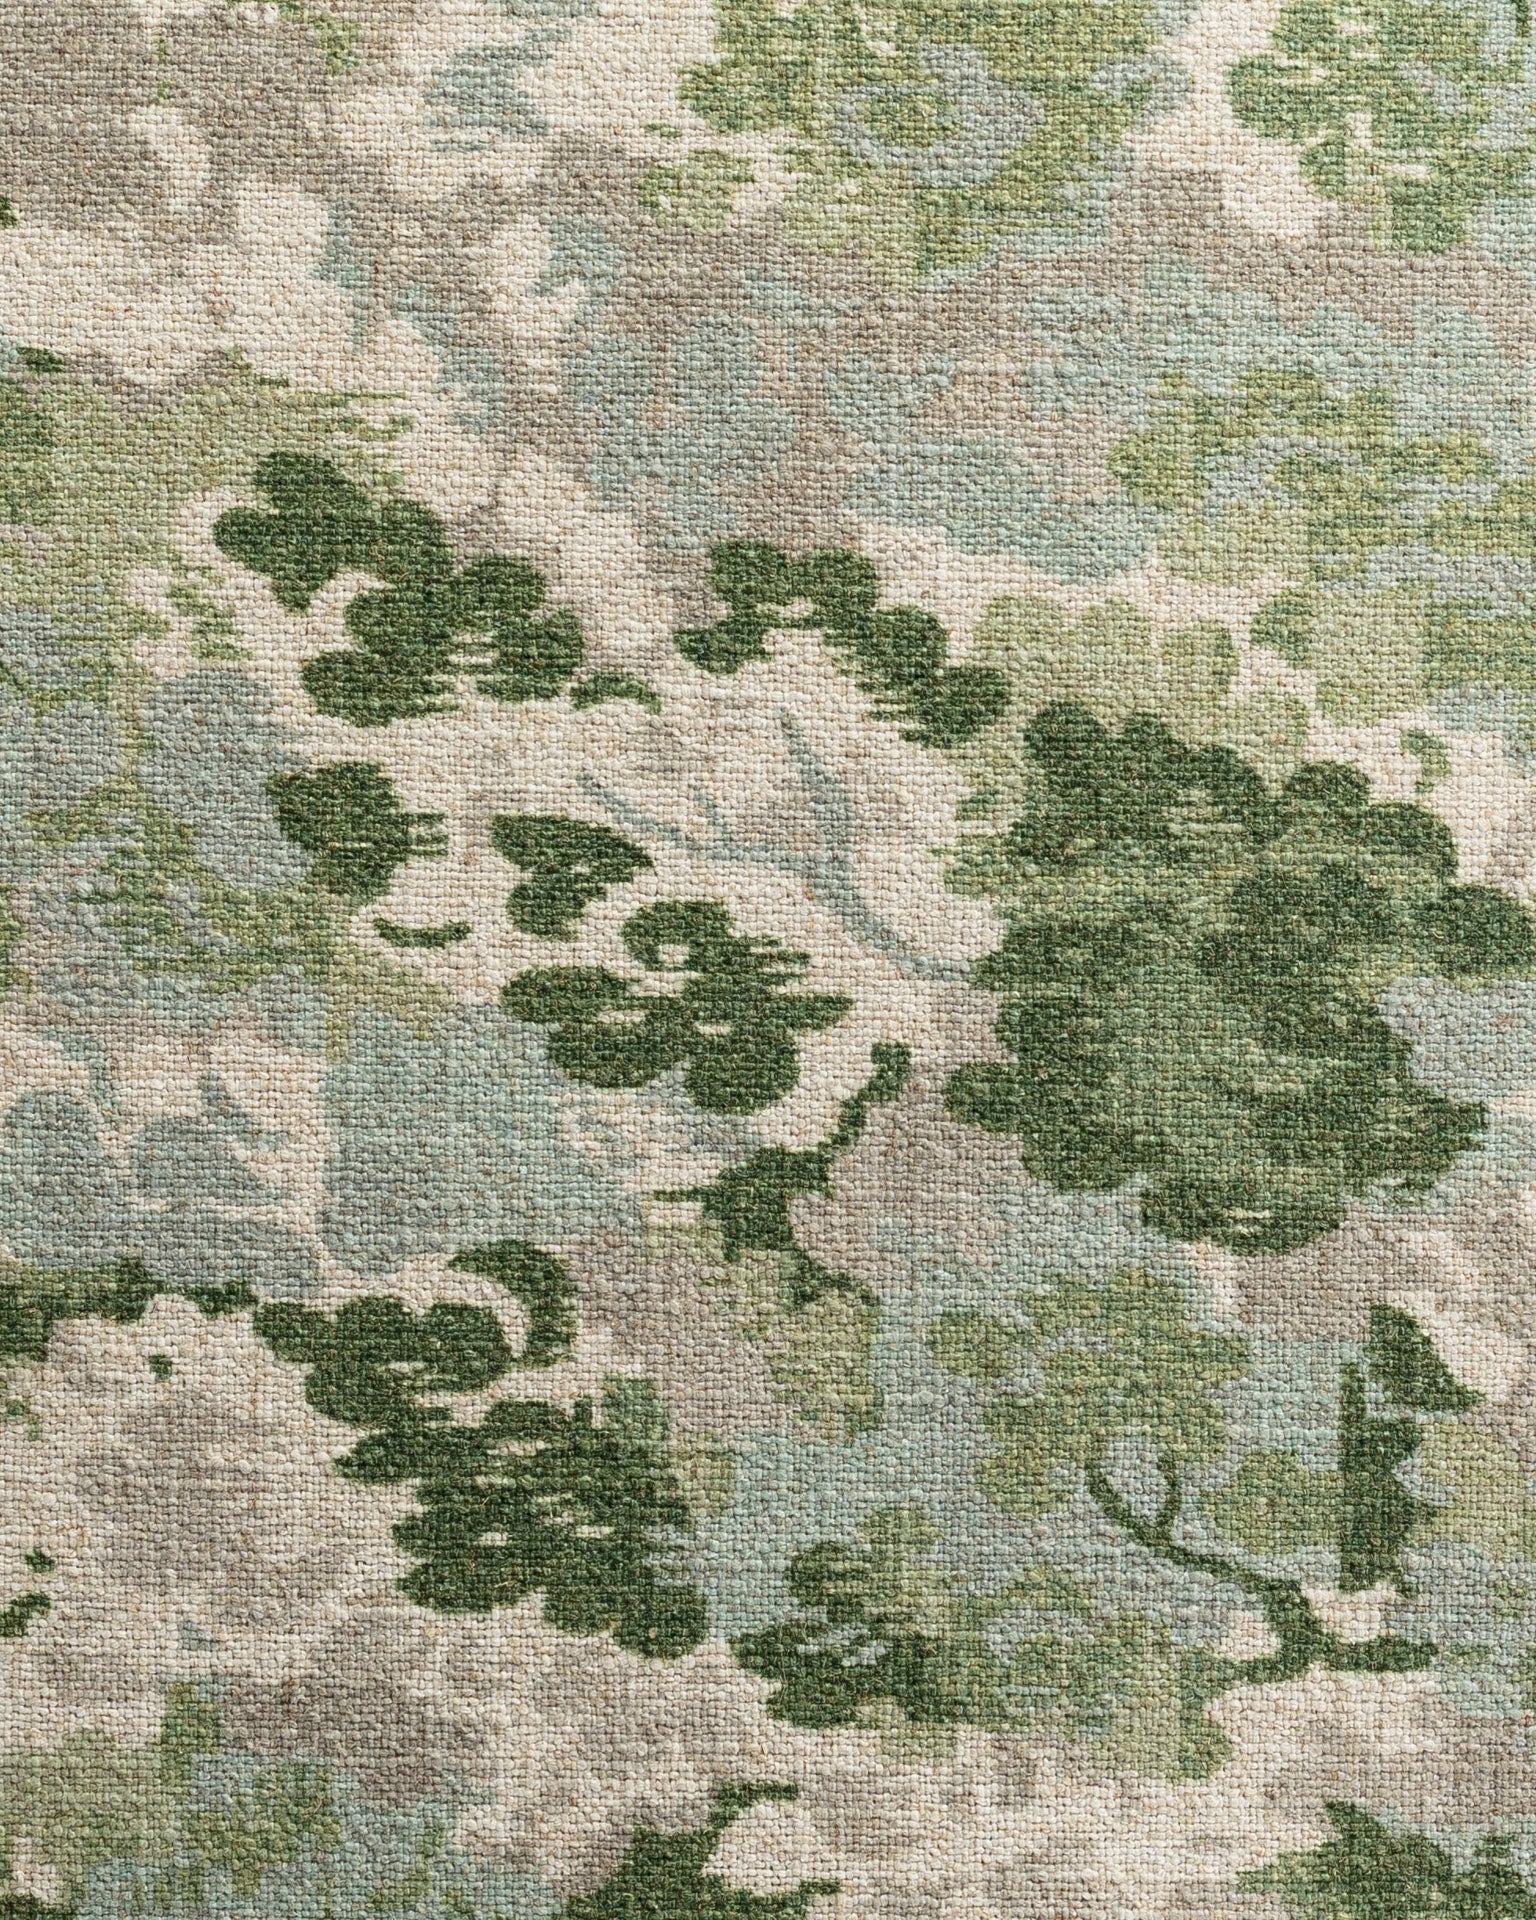 A close-up image of an Imperial Ivy Pillow 26x26 by Gabby, with a floral pattern featuring various shades of green leaves on a textured bungalow-style beige background.